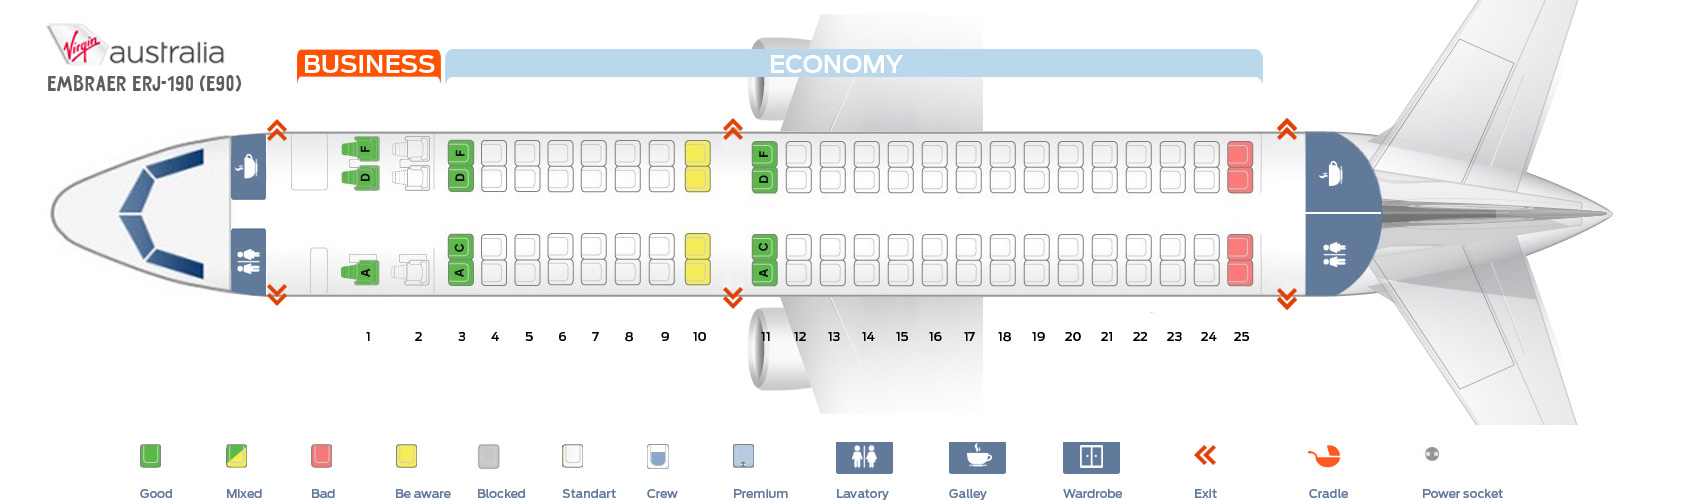 Embraer Emb E90 Jet Seating Chart